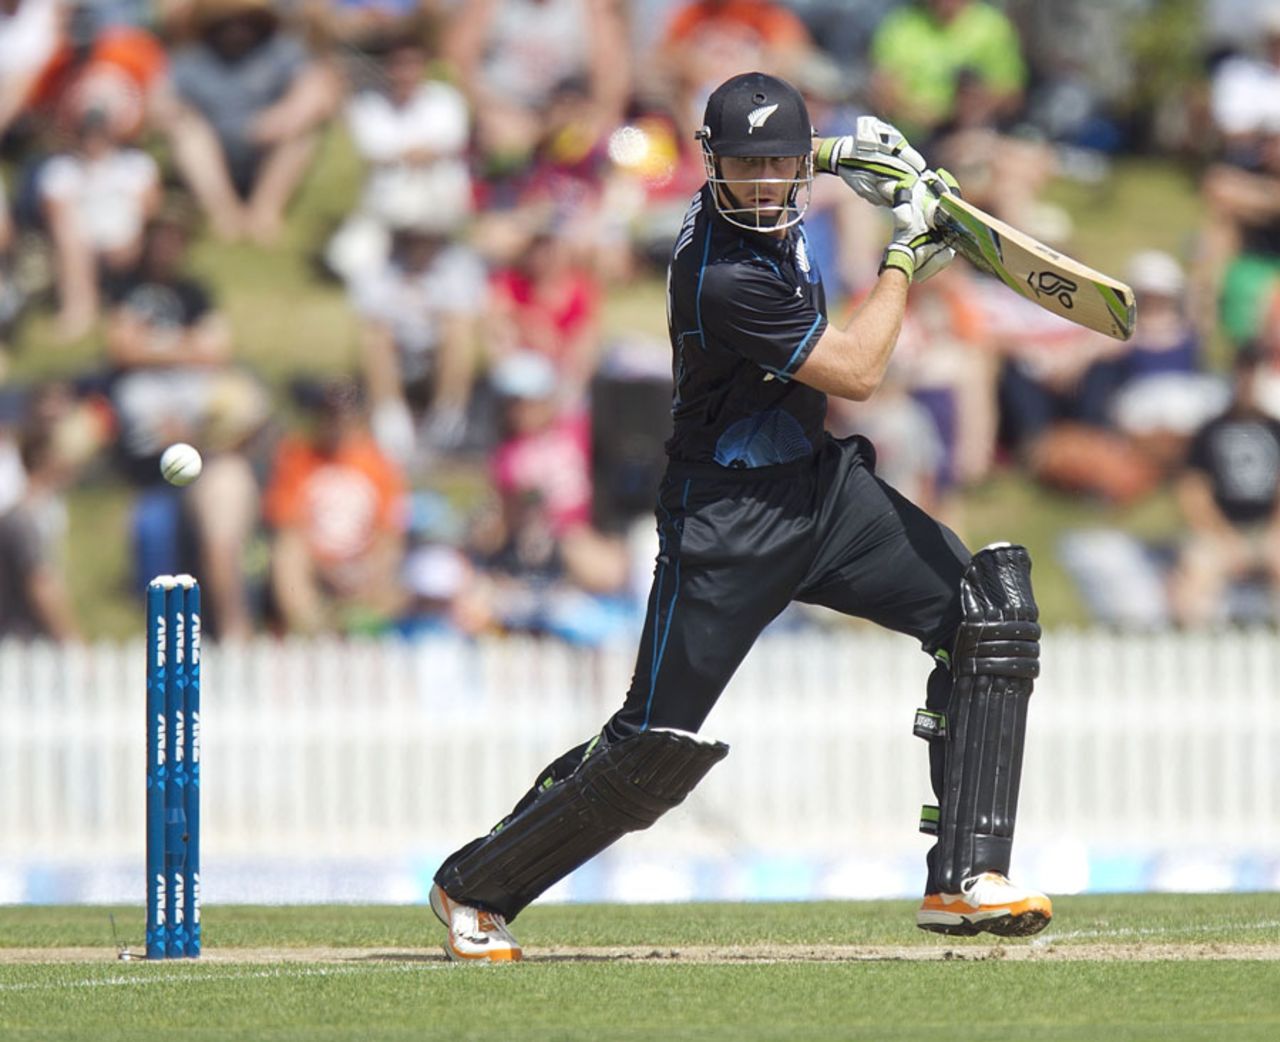 Martin Guptill opened up after a slow start, New Zealand v West Indies, 4th ODI, Nelson, January 4, 2014